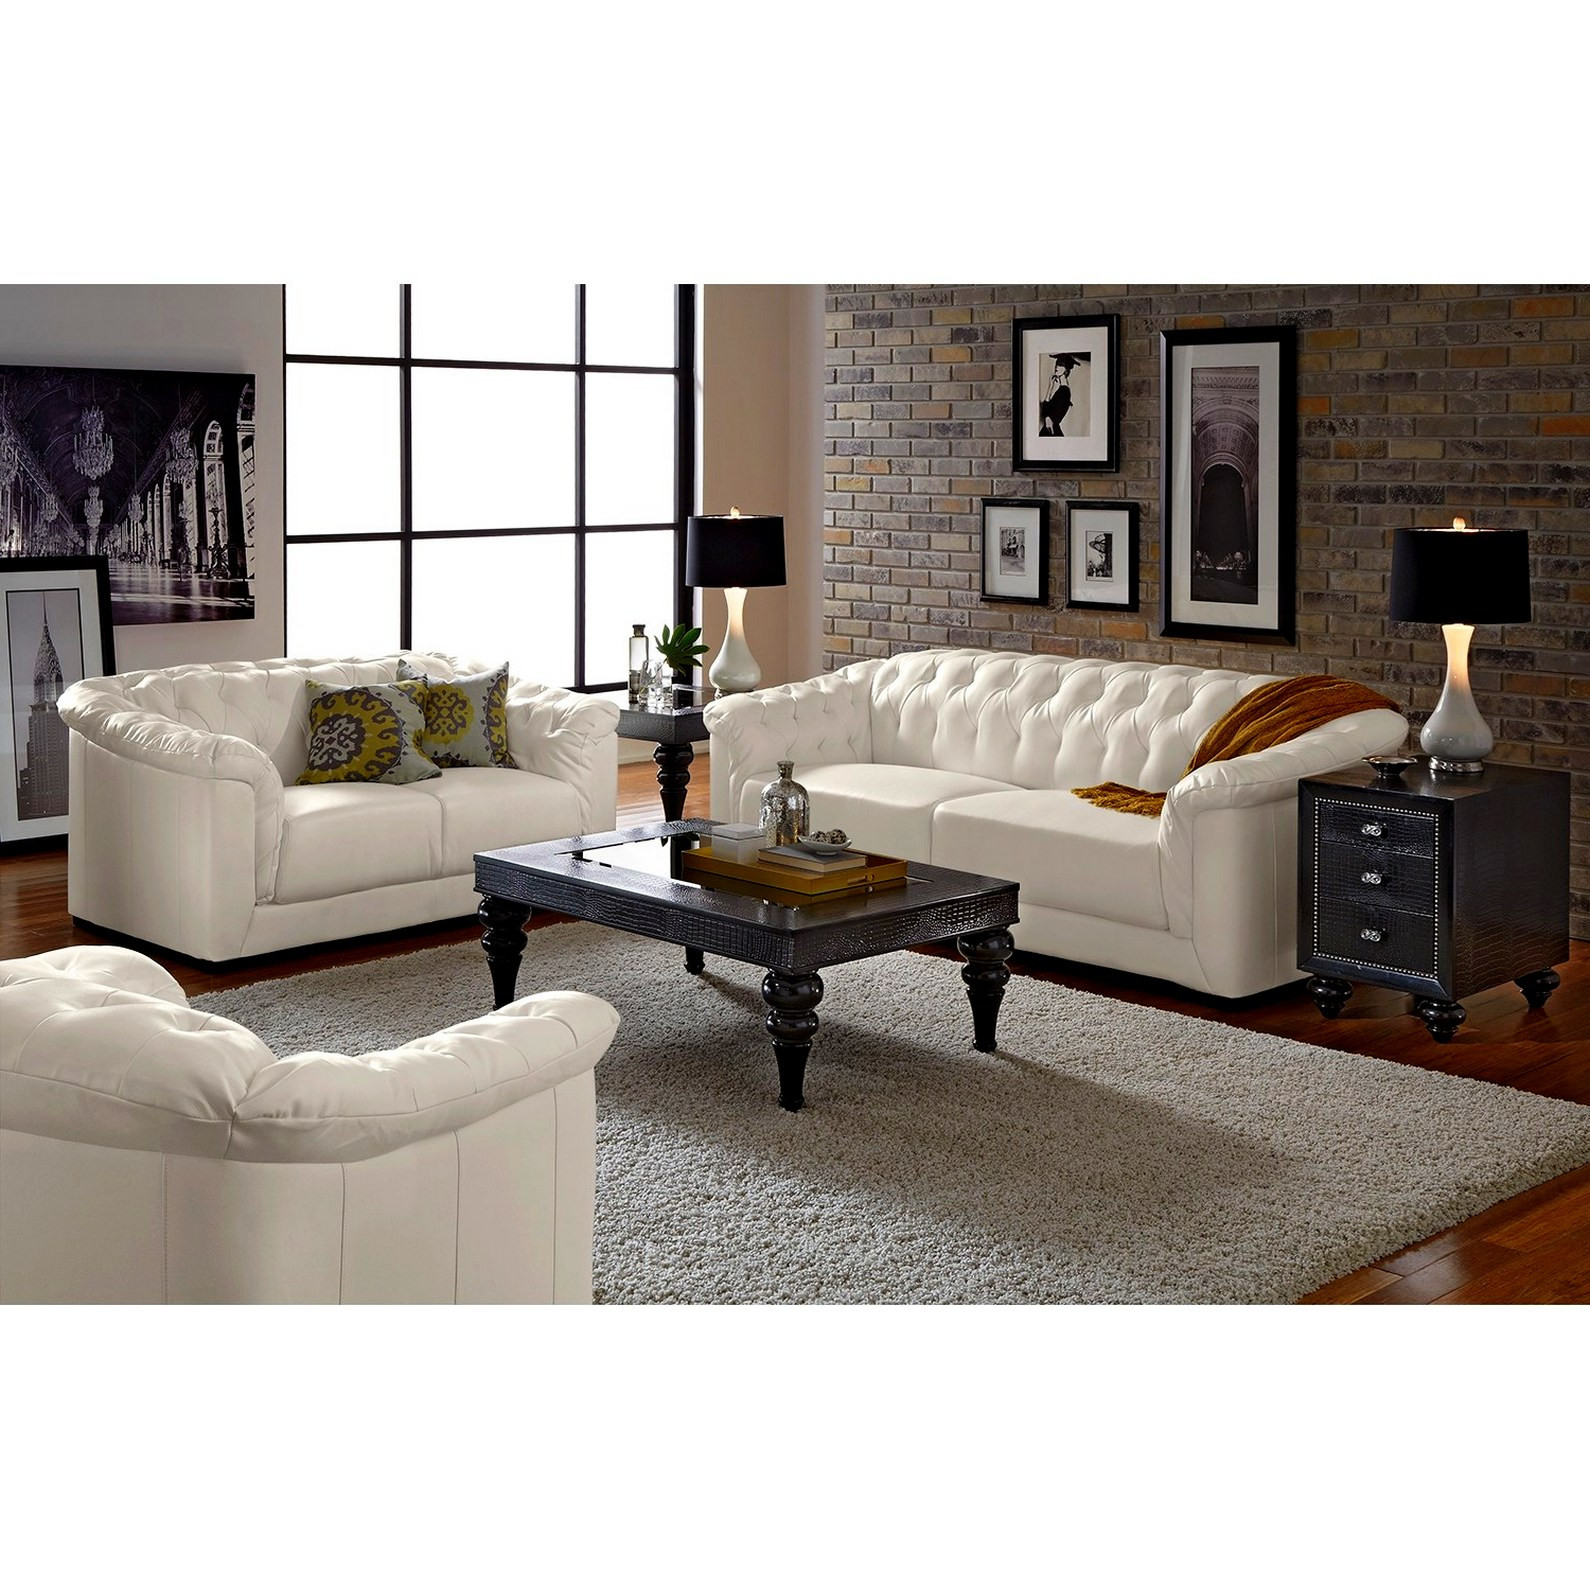 Value City Living Room Tables
 28 Luxury Value City sofa Tables everythingalyce